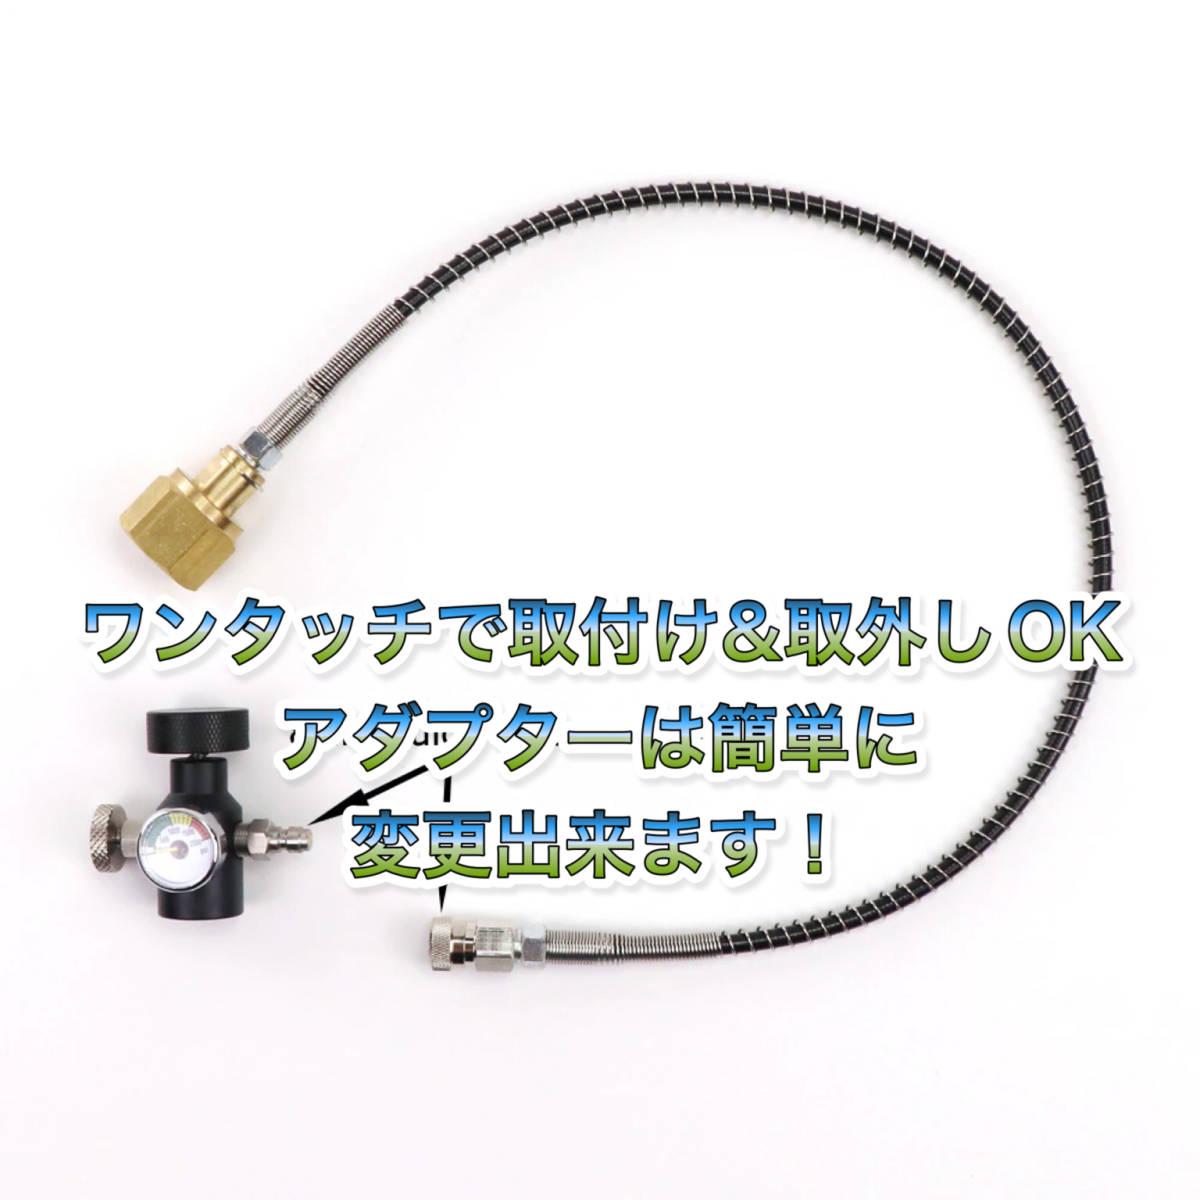  pressure gauge attaching adaptor!midobon. connection . soda Stream. gas cylinder . filling ( drink Mate 